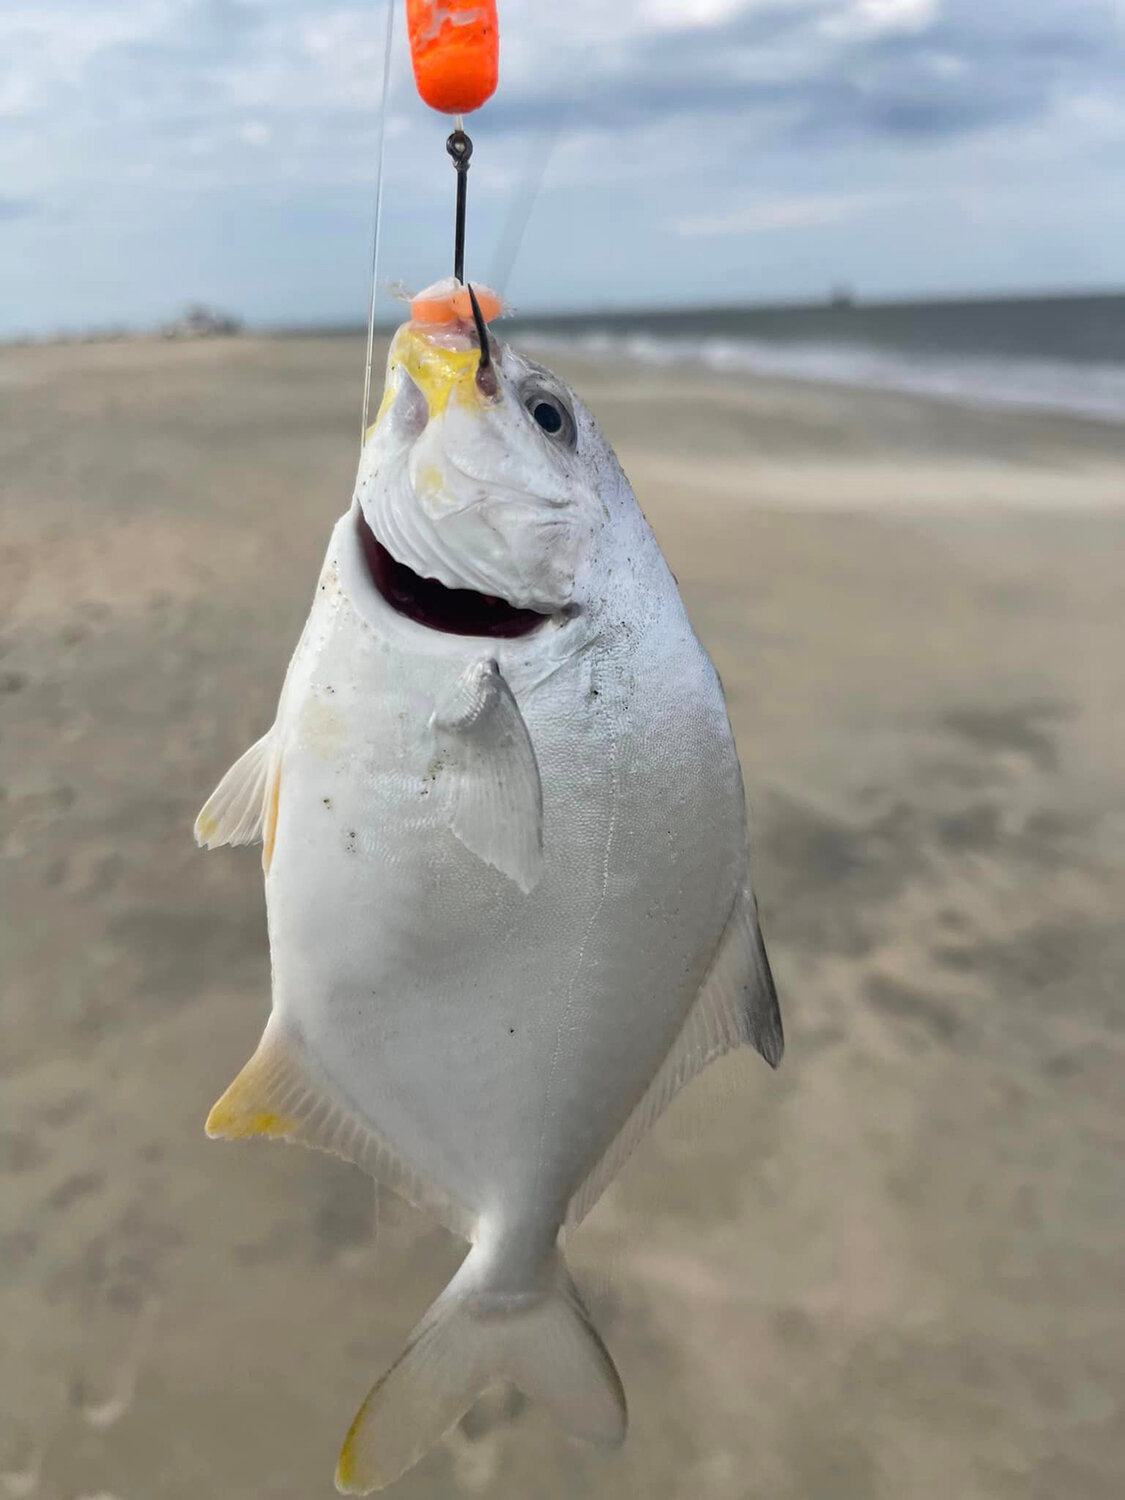 Michelle Hurff and crew caught pompano at The Point.